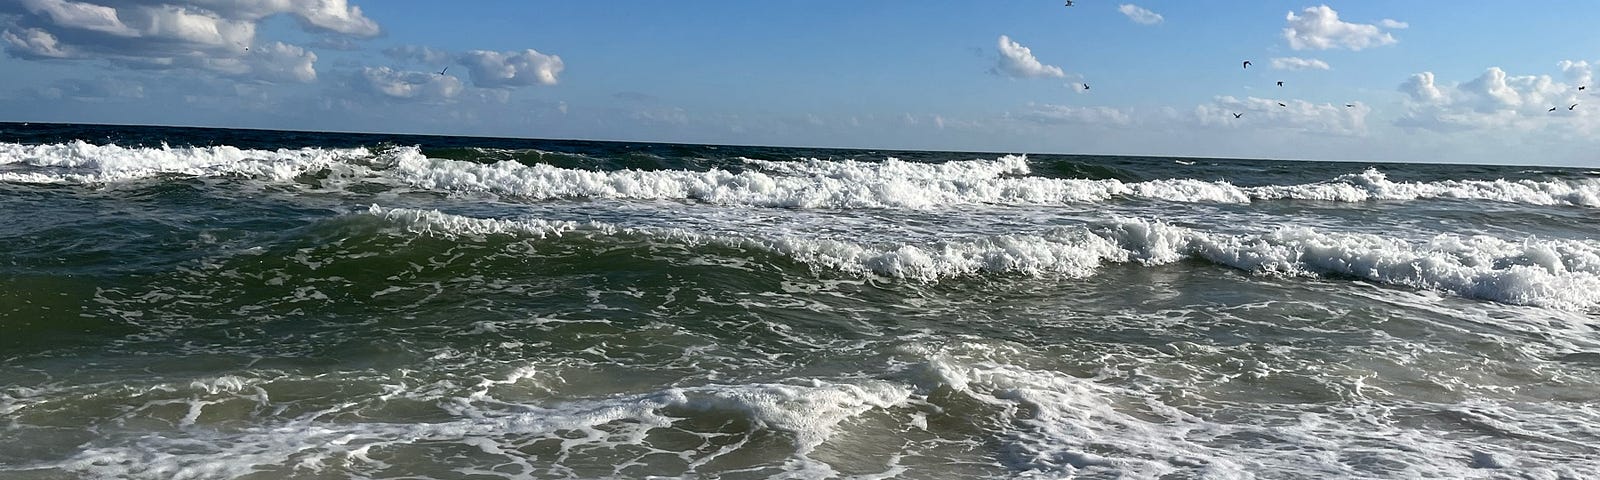 A picture of the ocean midday, as waves recede. Nothing but sky in the background.